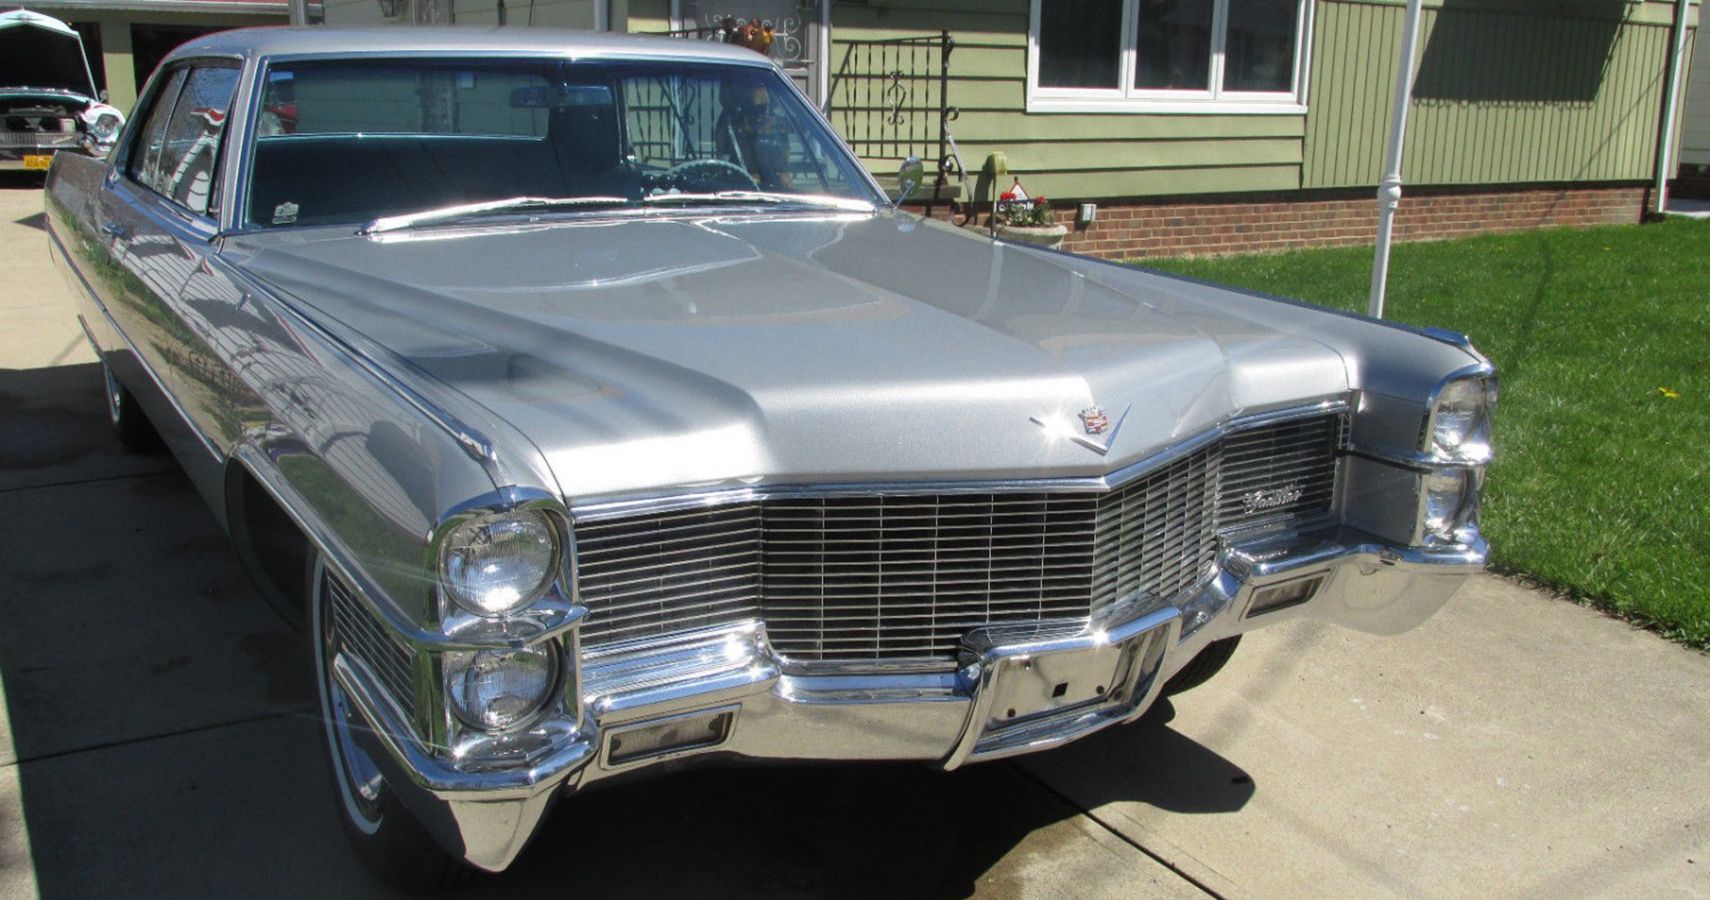 In Real Life, Don Draper's Cadillac Deville Was Auctioned Off By ScreenBid, Along With Some 1,000-Plus Vintage Items Of Mad Men